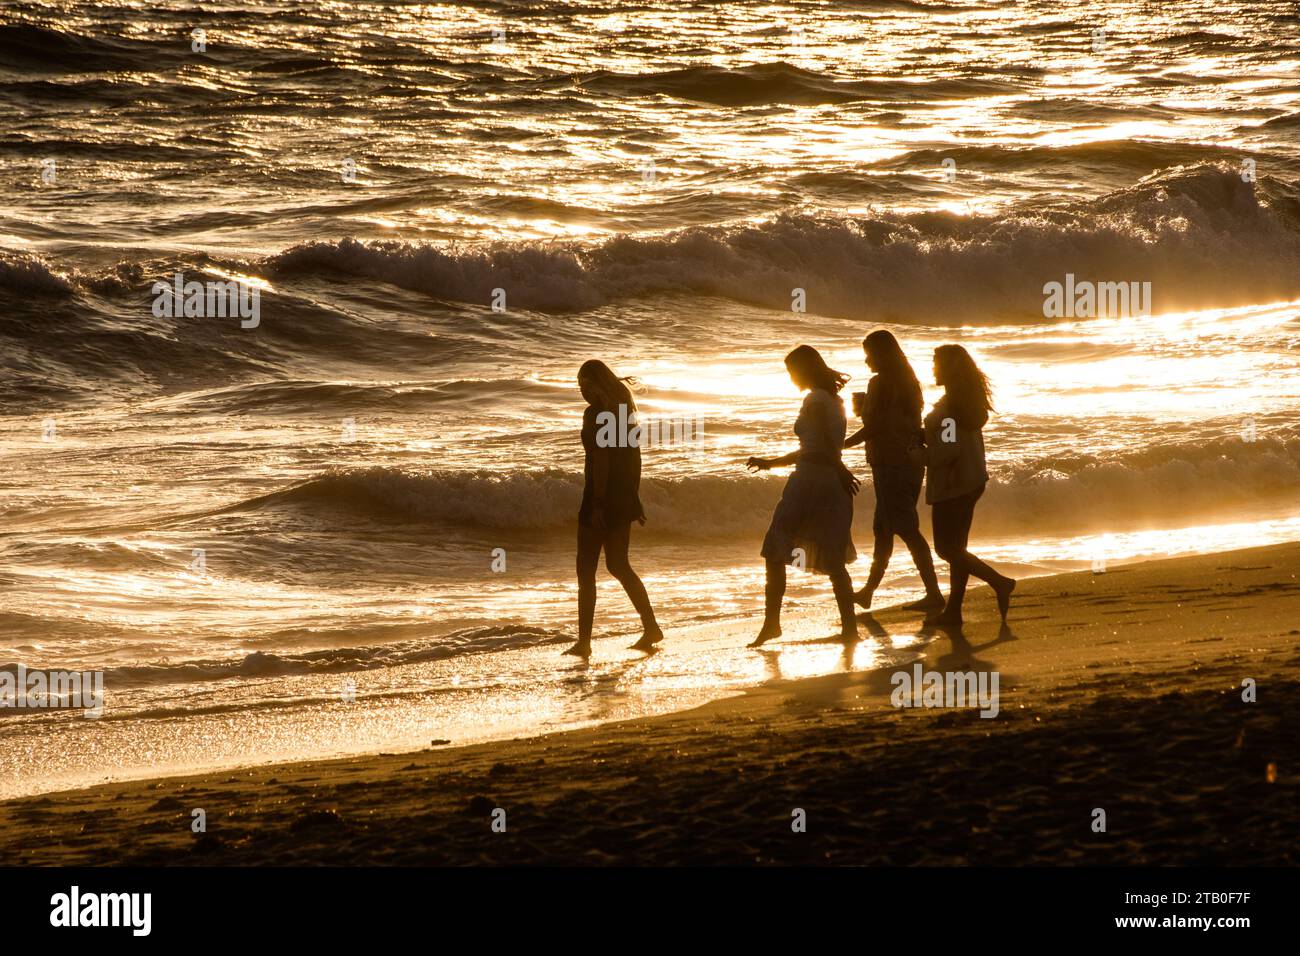 Silhouettes on the beach at sunset in Venice Beach, California, USA, Pacific Coast. Stock Photo